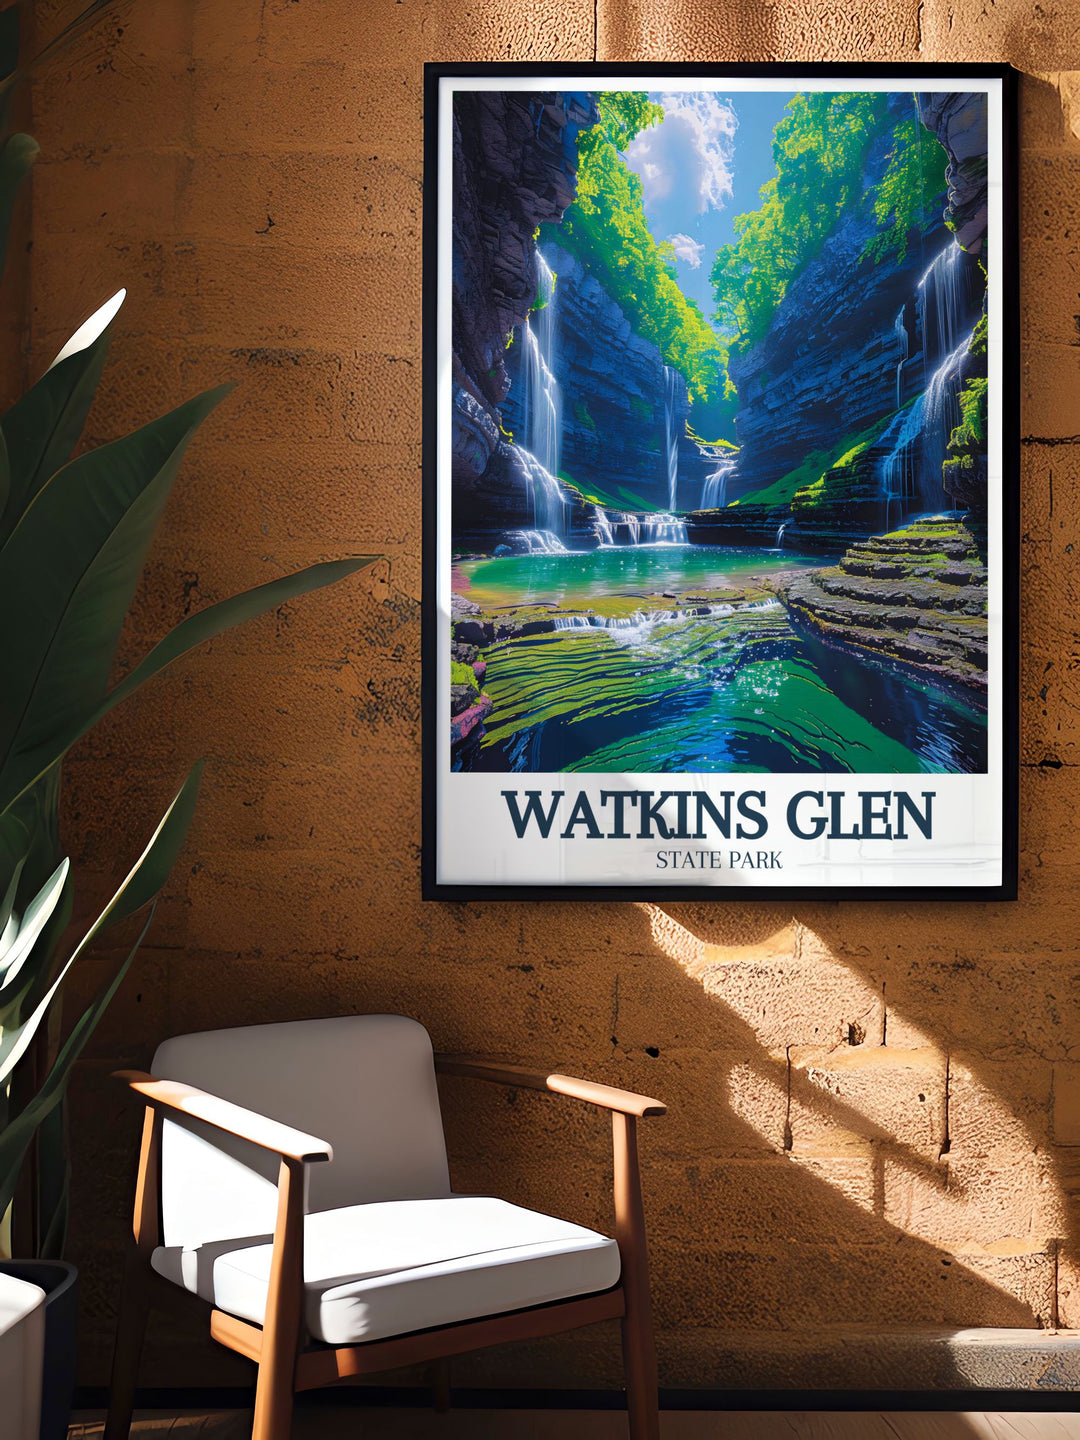 This detailed print of Watkins Glen State Park captures the natural beauty of one of New Yorks most beloved parks. Featuring its iconic waterfalls and lush greenery, this artwork brings a piece of the states natural splendor into your home, offering a peaceful escape and a touch of geological wonder to any decor.